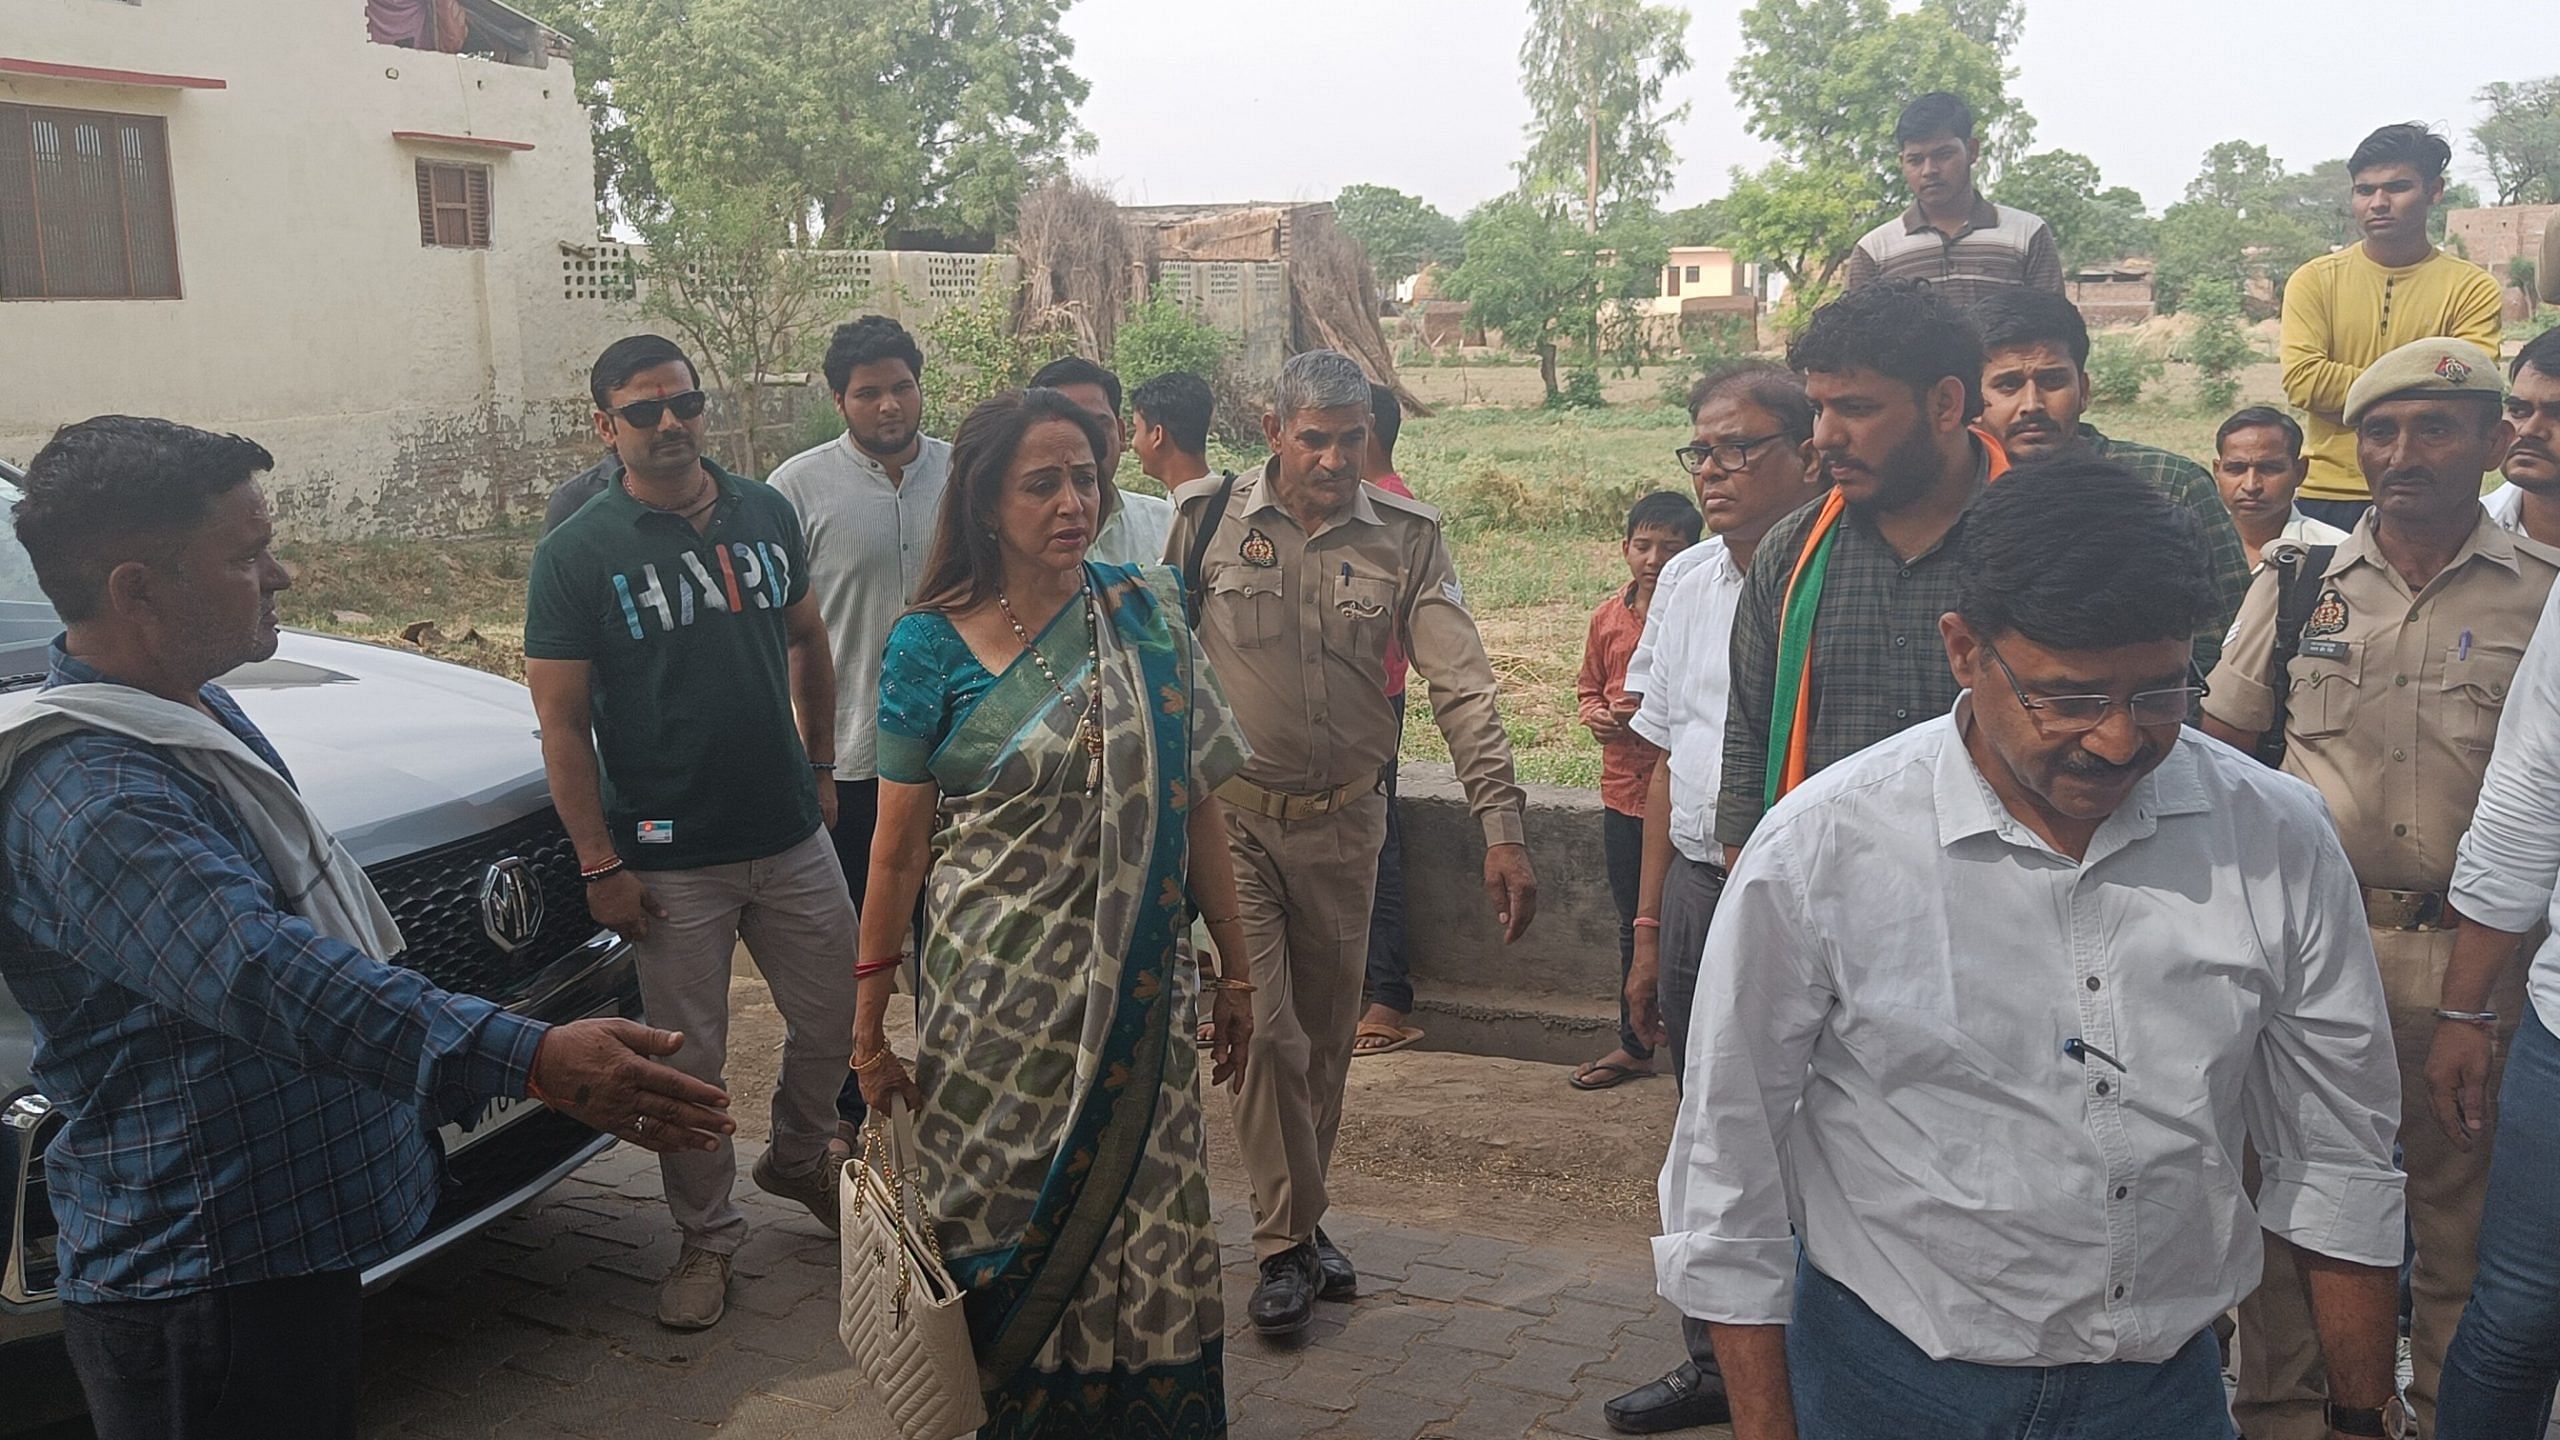 my job is to work, not sit in people’s homes — hema malini, bjp’s mathura pick vying for 3rd term